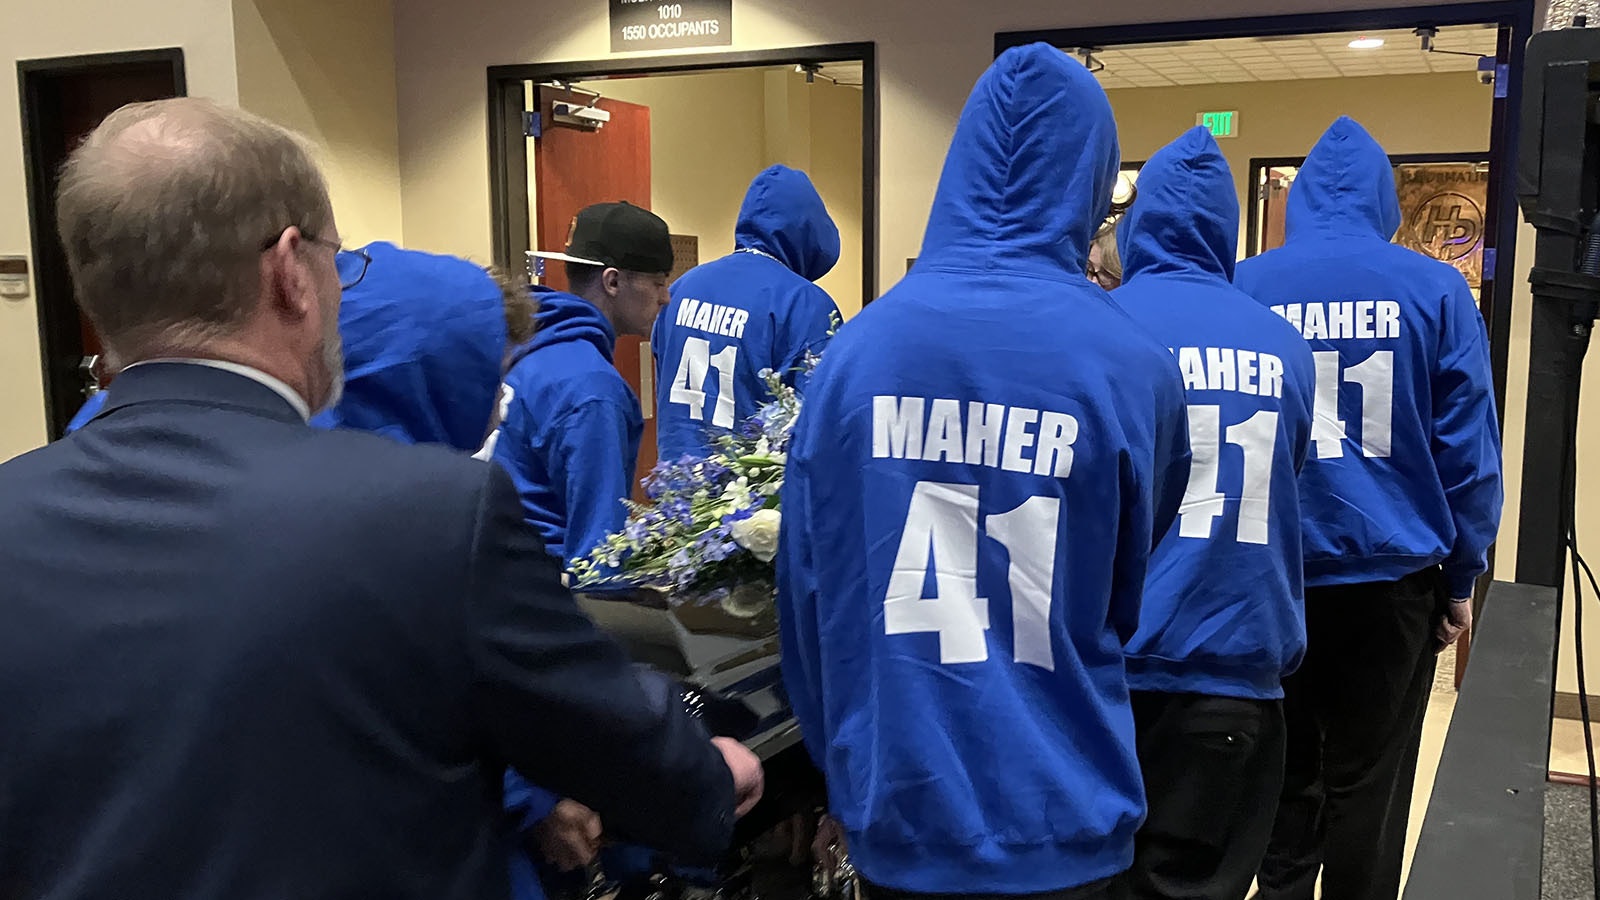 Bobby Maher’s pallbearers, who included his brothers and friends, all word blue hooded sweatshirts with his name and baseball jersey number, “41.”